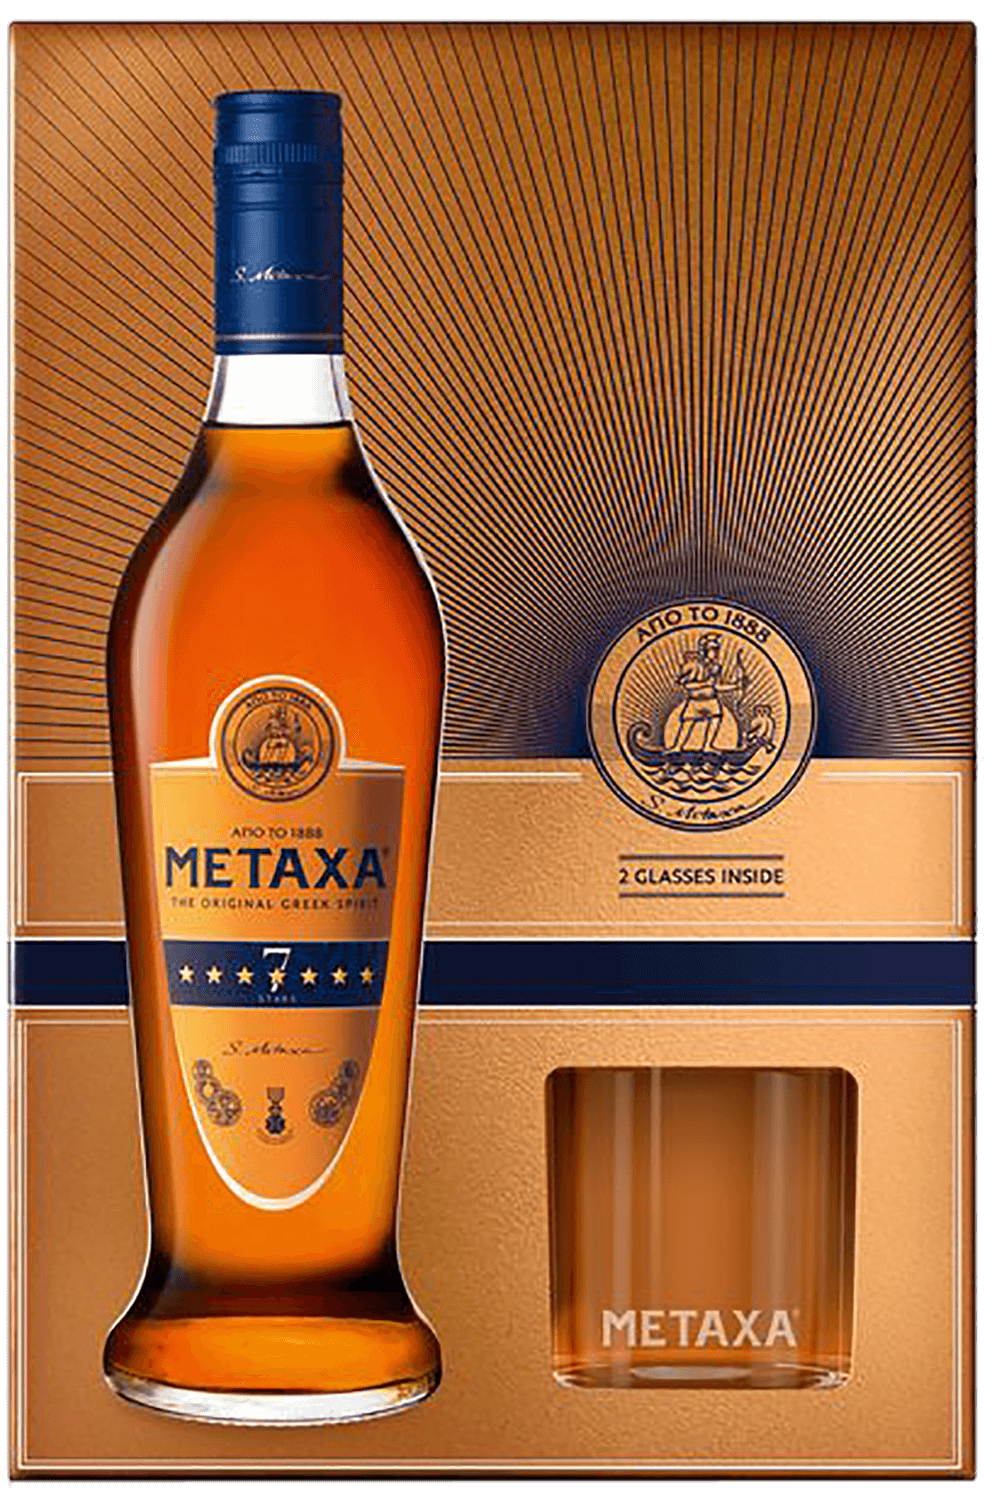 Metaxa 7 stars (gift box with two glasses) courvoisier vs in gift box with two glasses